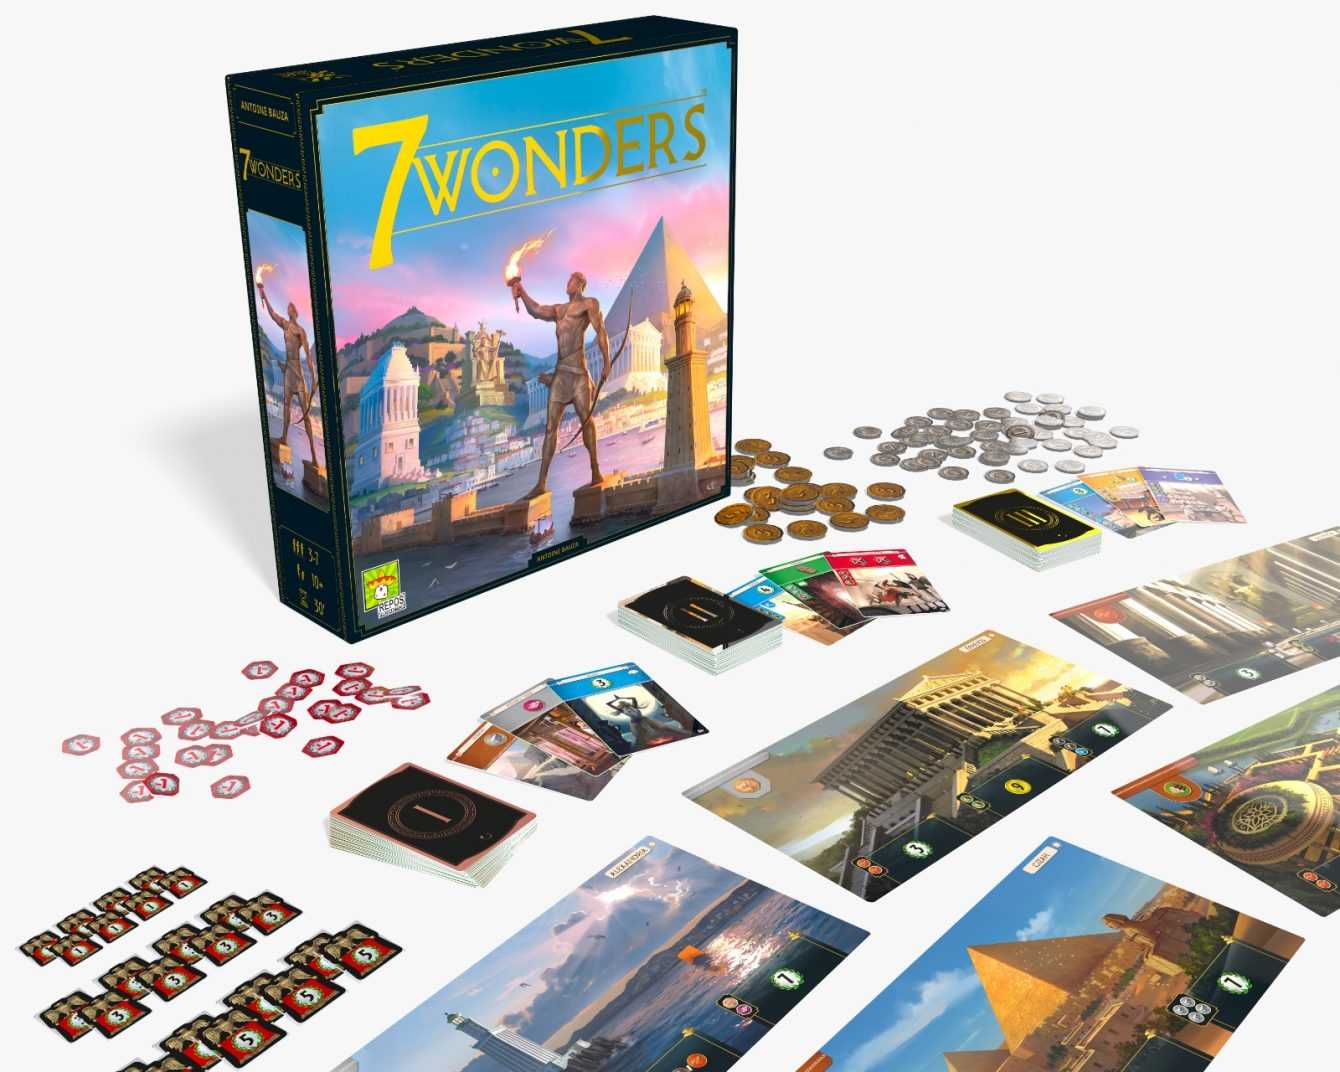 New Asmodee releases: all the news for March 2021